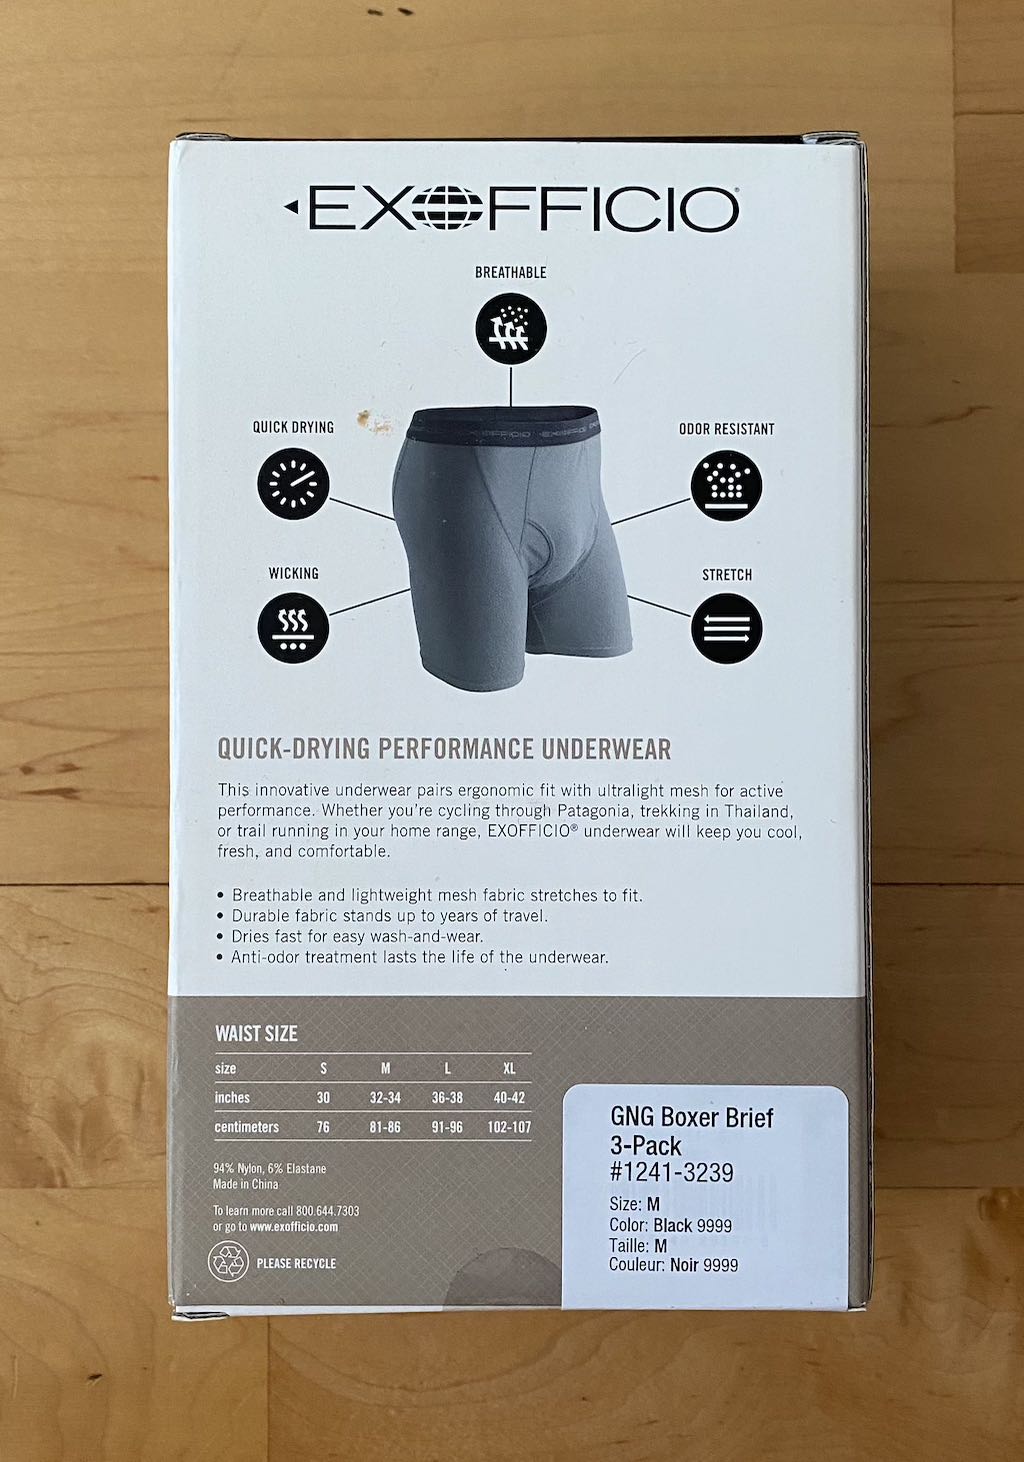 The back of the ExOfficio Give-n-Go boxer brief box